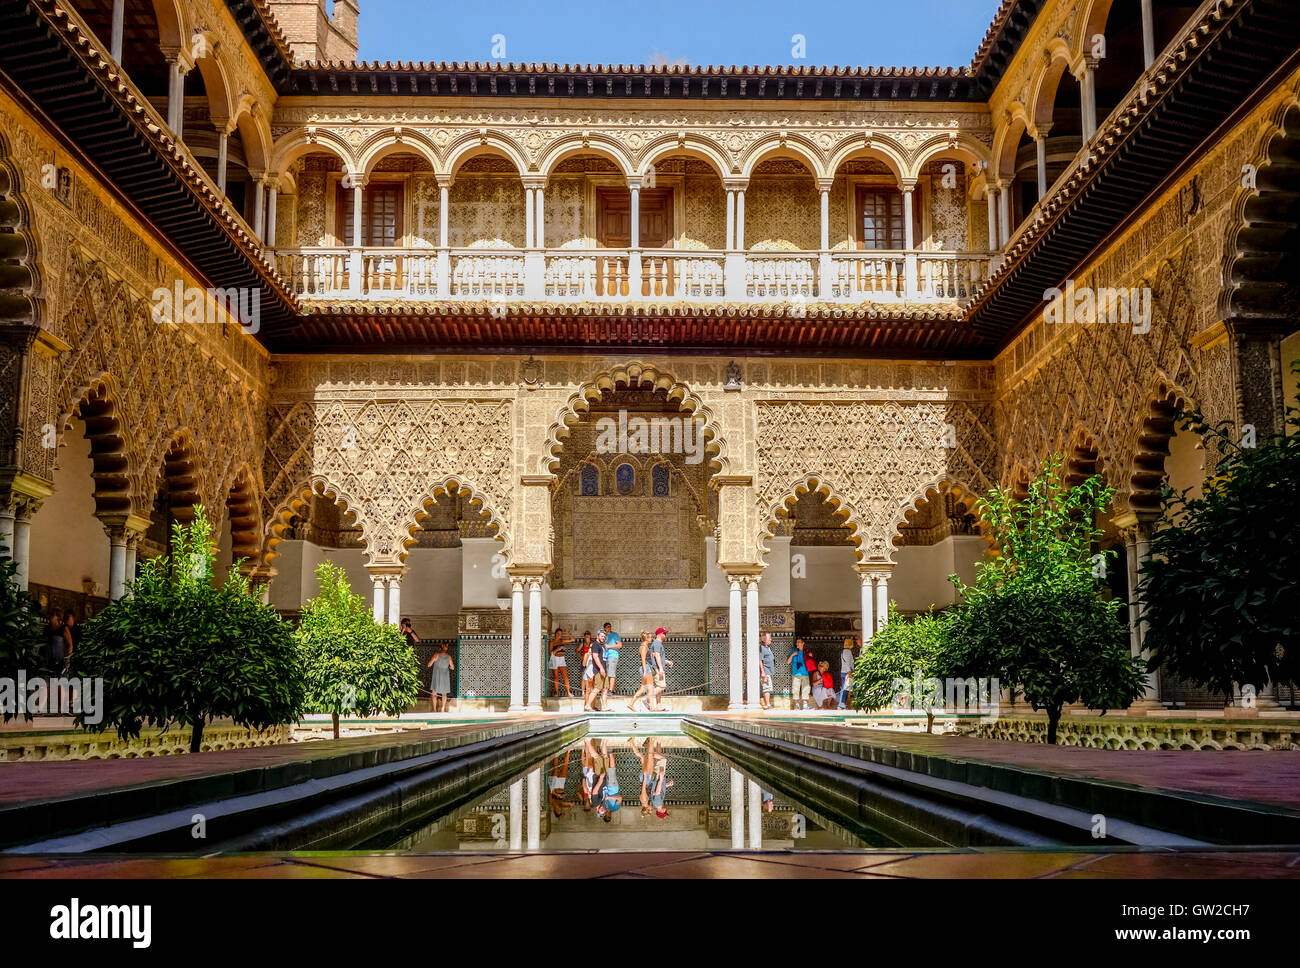 Alcazar, Seville, The Courtyard of the Maidens, Patio de las Doncellas at Moorish palace, Andalusia, Spain. Stock Photo